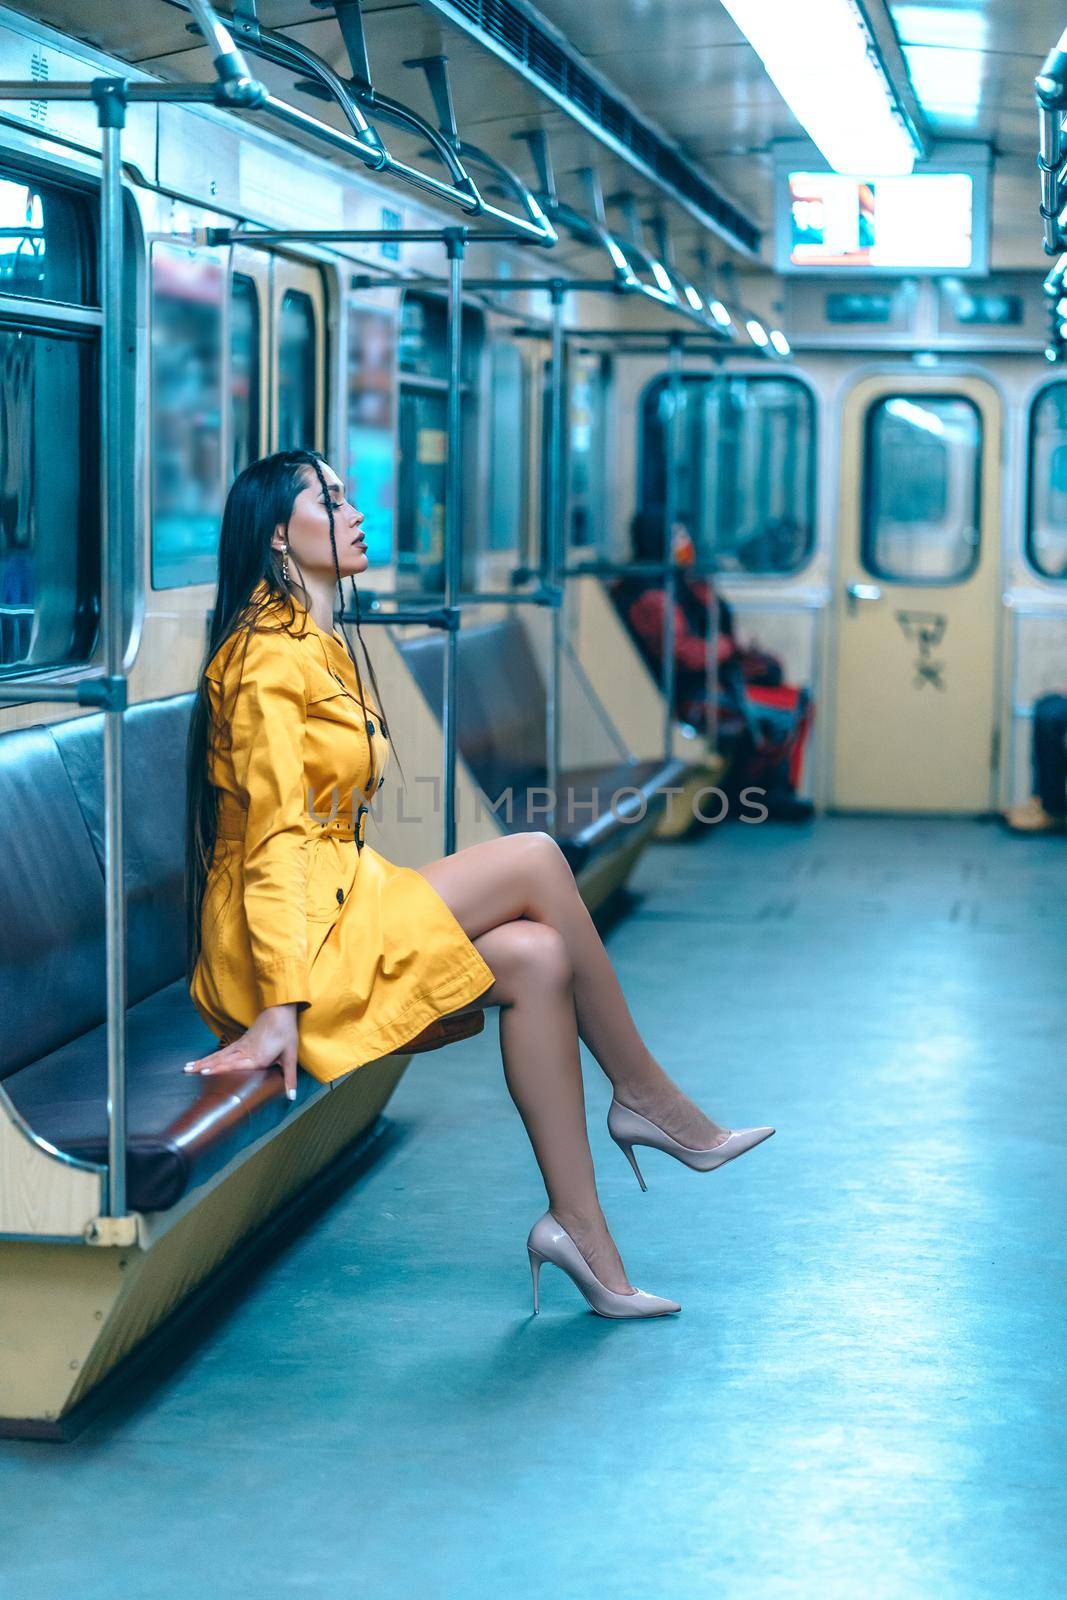 Charming Lady in a Cute Sexy Yellow Dress with Delightful Slender Legs Sitting Inside the Empty Underground Train. Full Size Profile of Nice Woman in Yellow Coat in the Train. Close-up . High quality photo